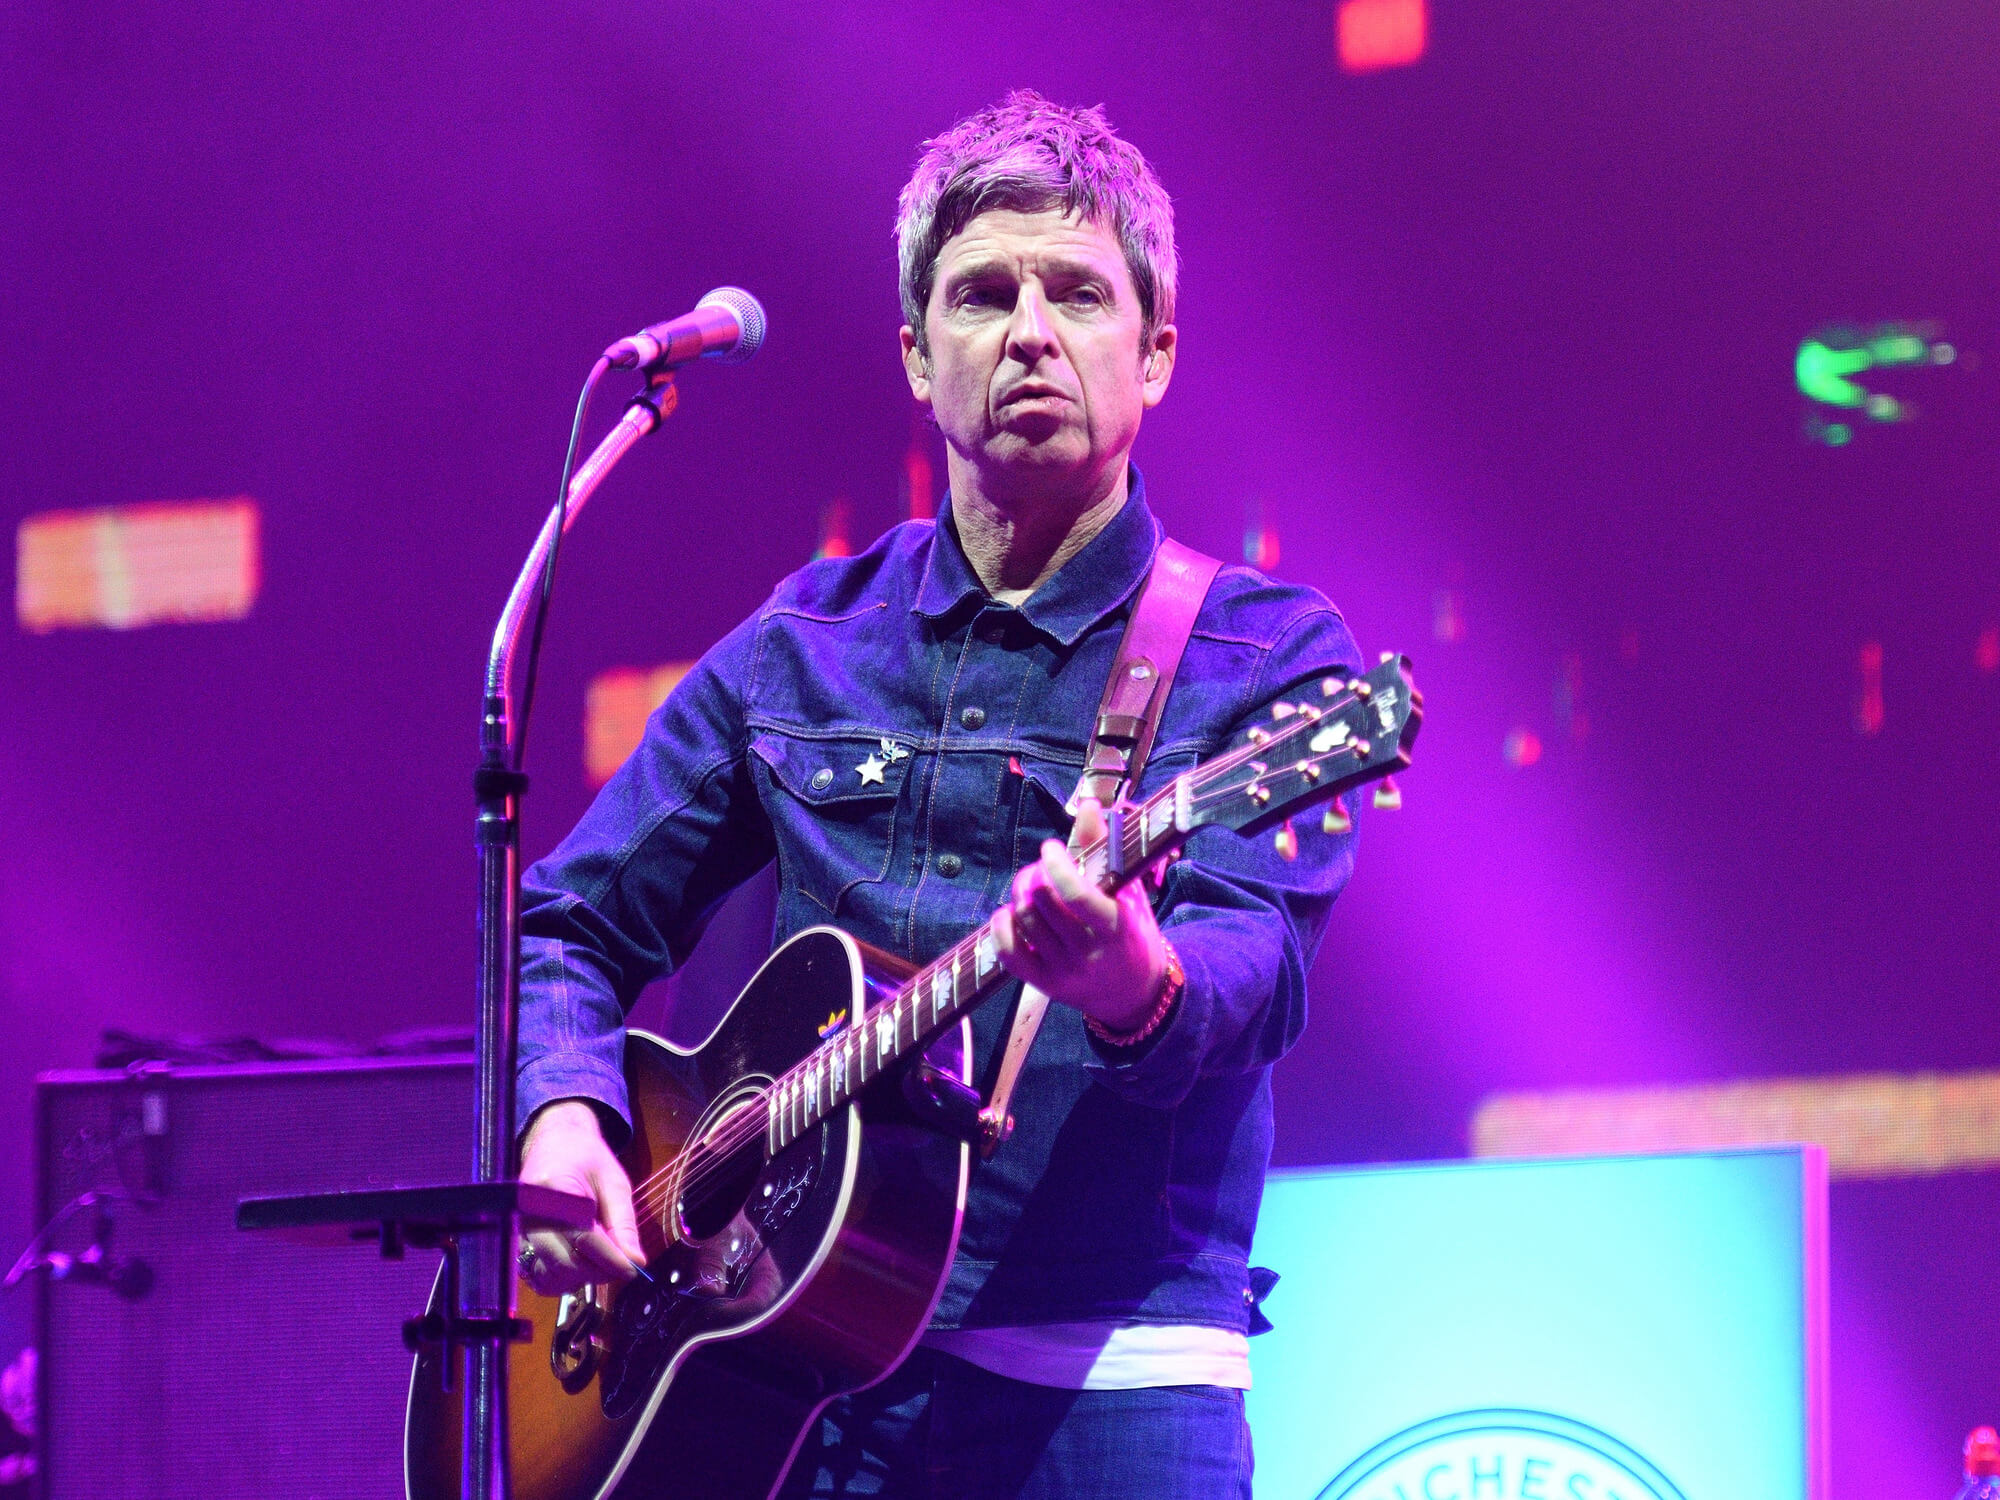 Noel Gallagher playing guitar on stage